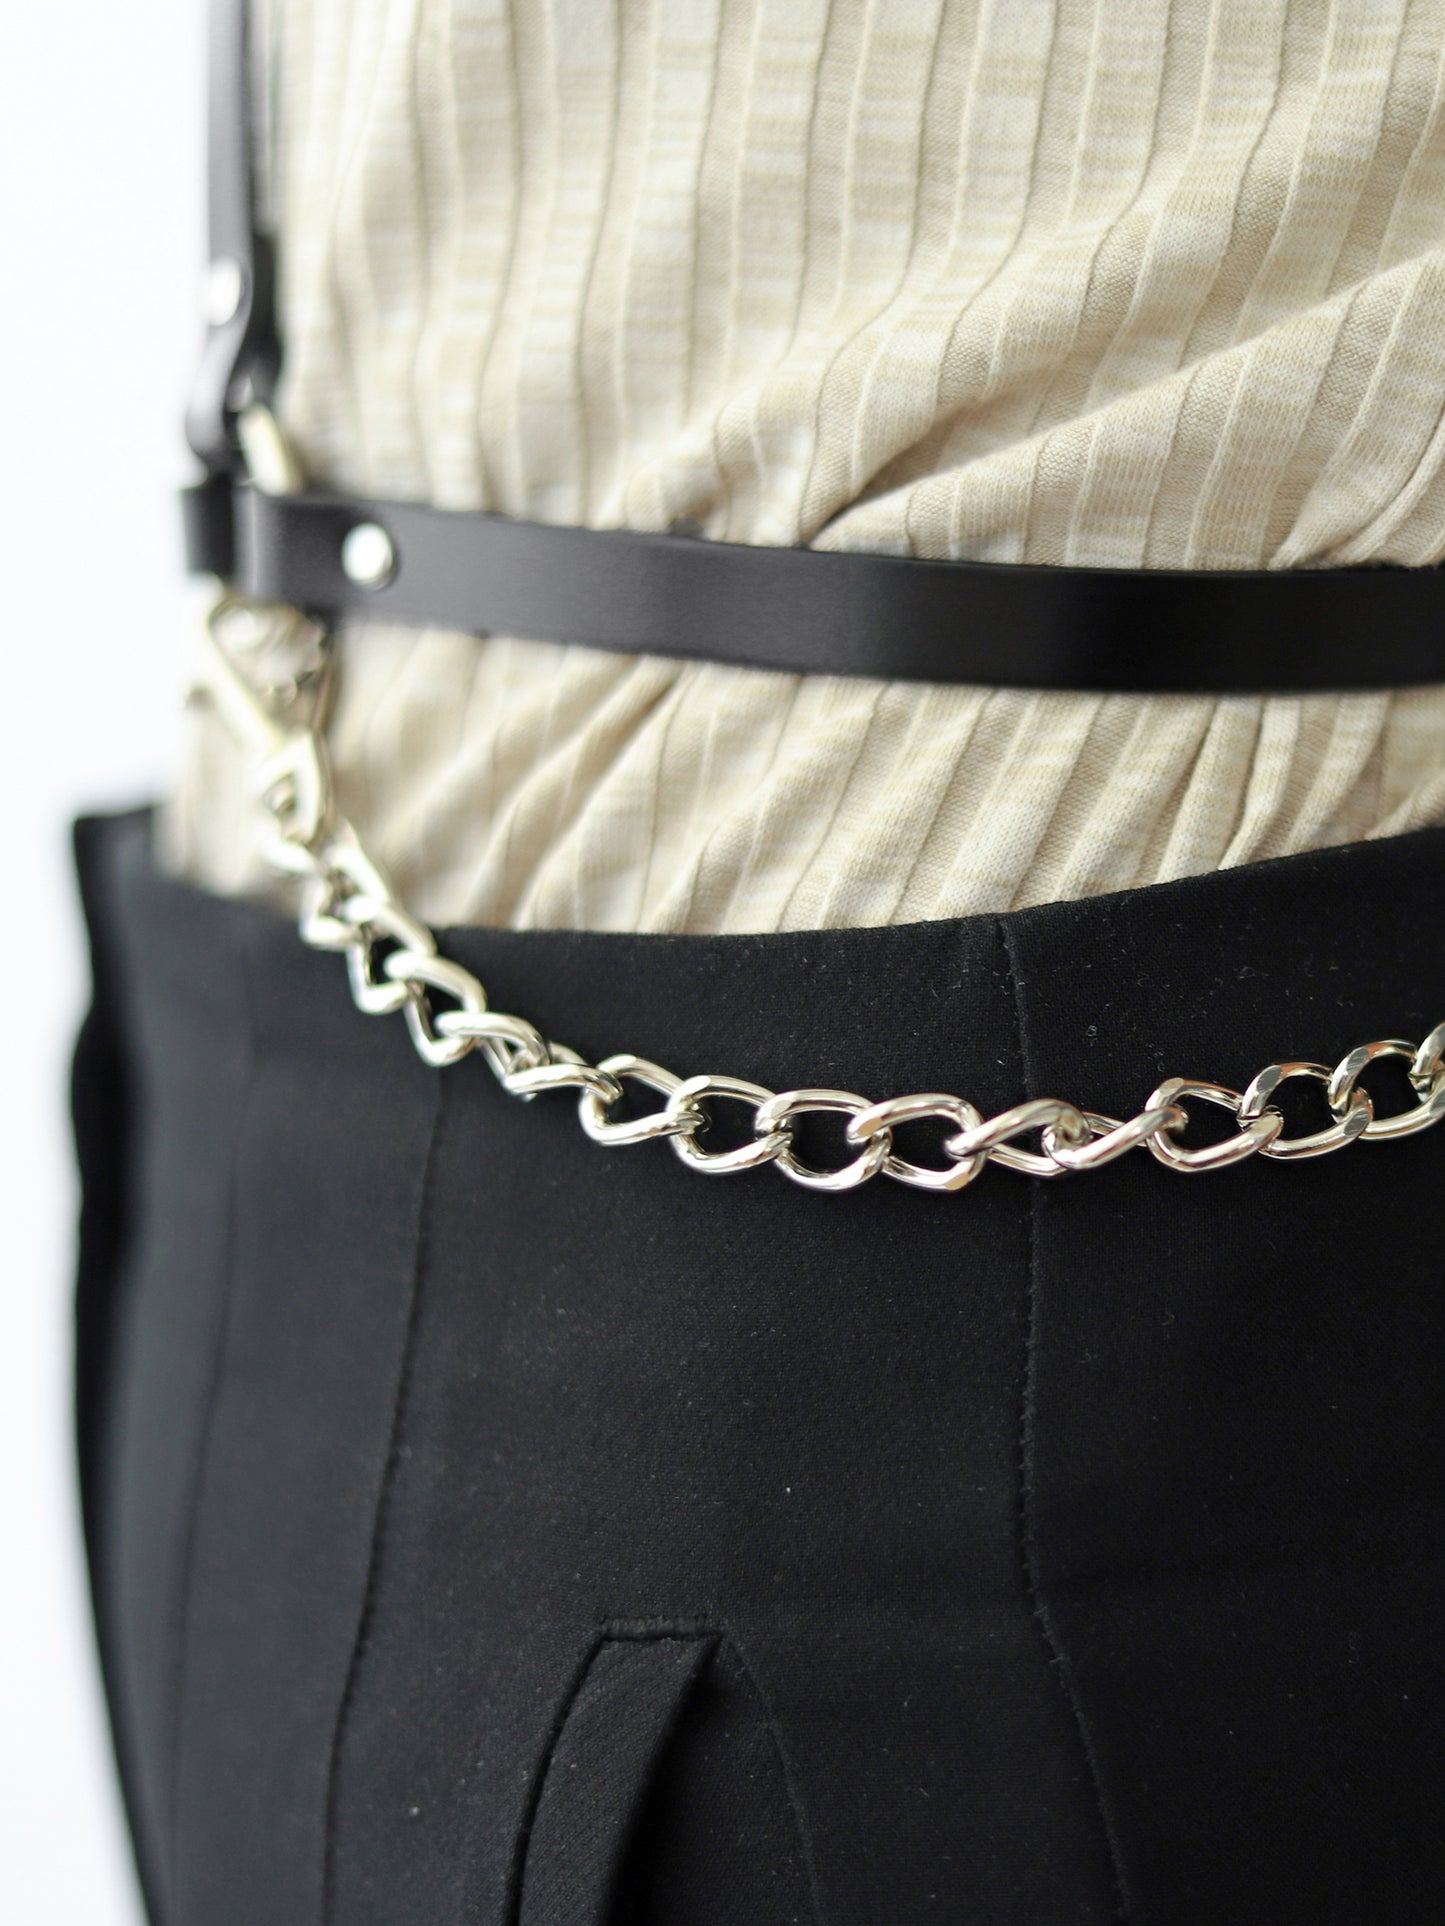 Detail of leather chain harness.